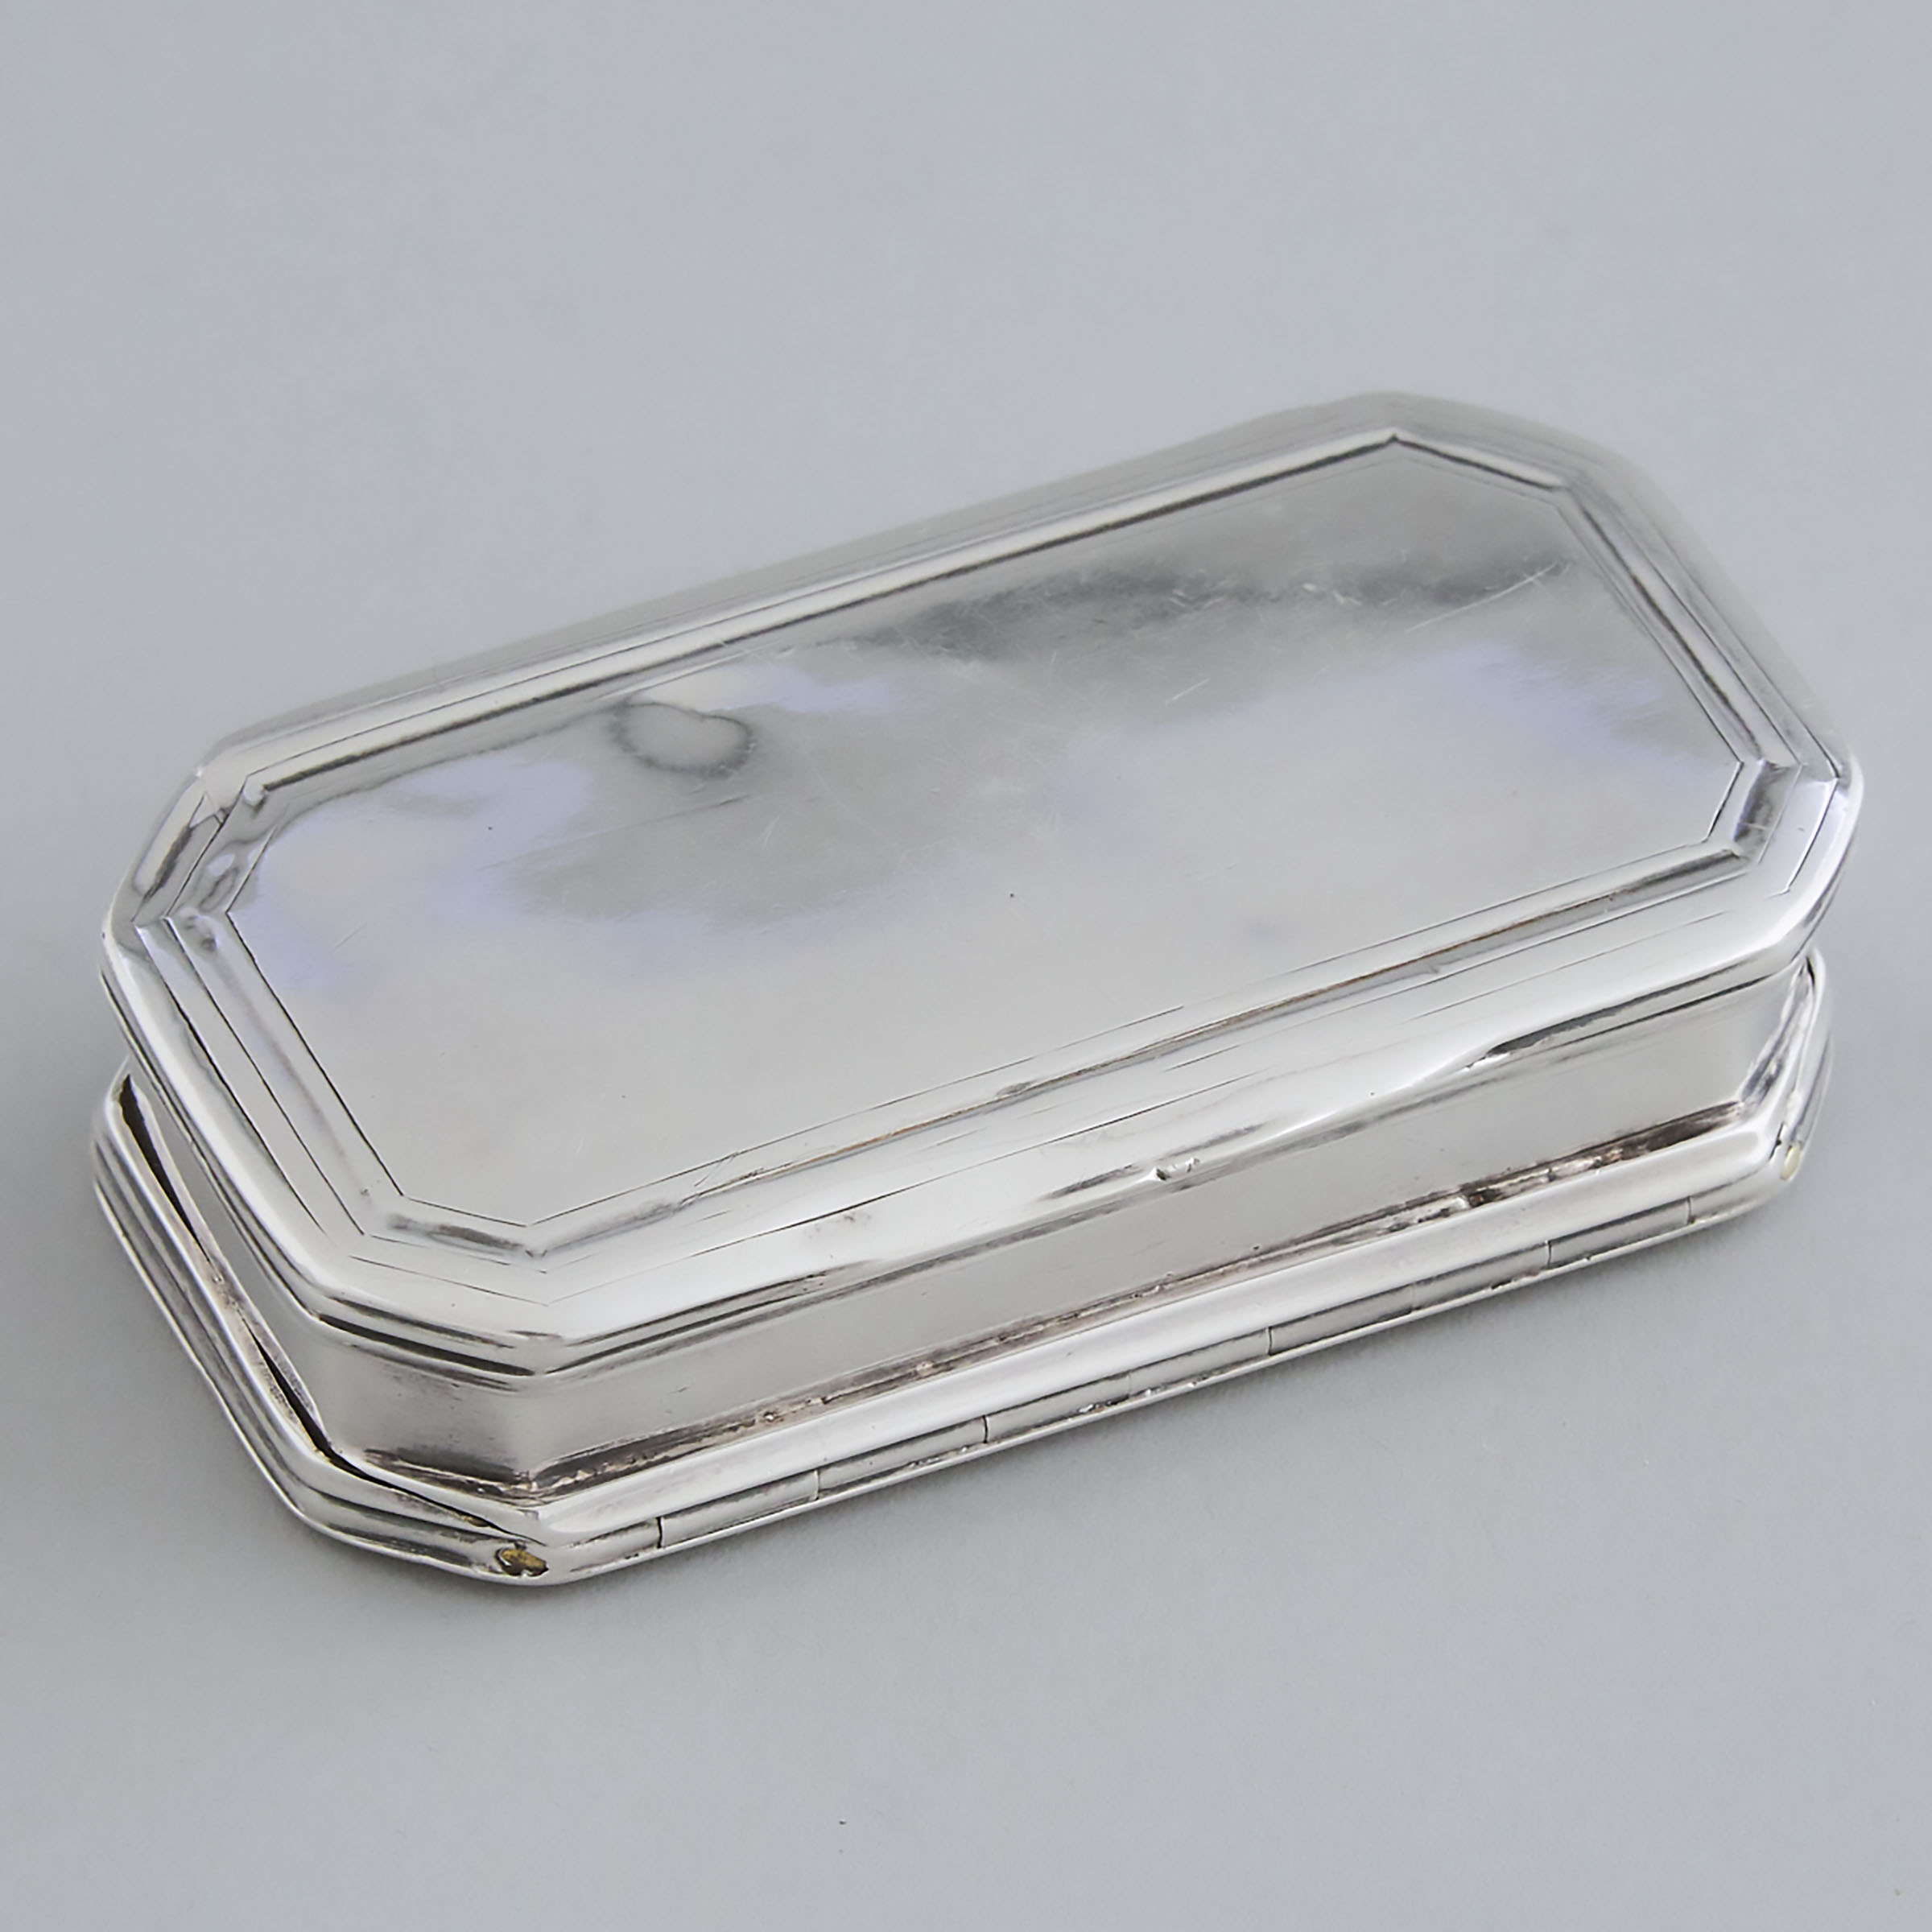 Continental Silver Double-Sided Chamfered Rectangular Snuff Box, late 18th/early 19th century